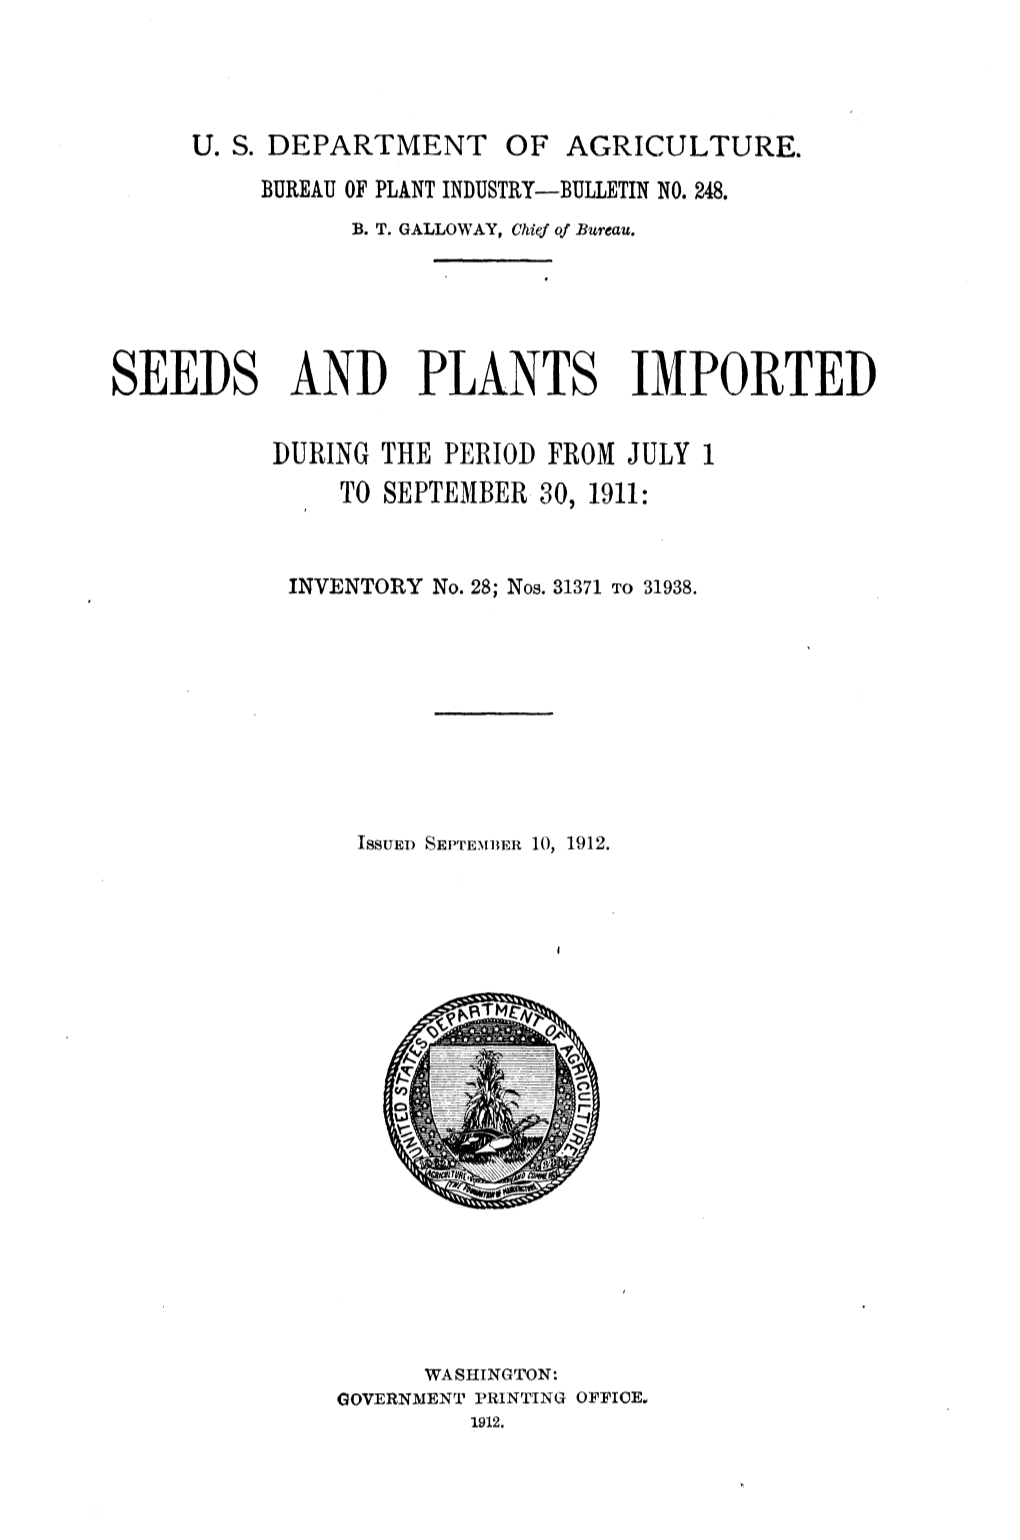 Seeds and Plants Imported During the Period from July 1 to September-30, 1911